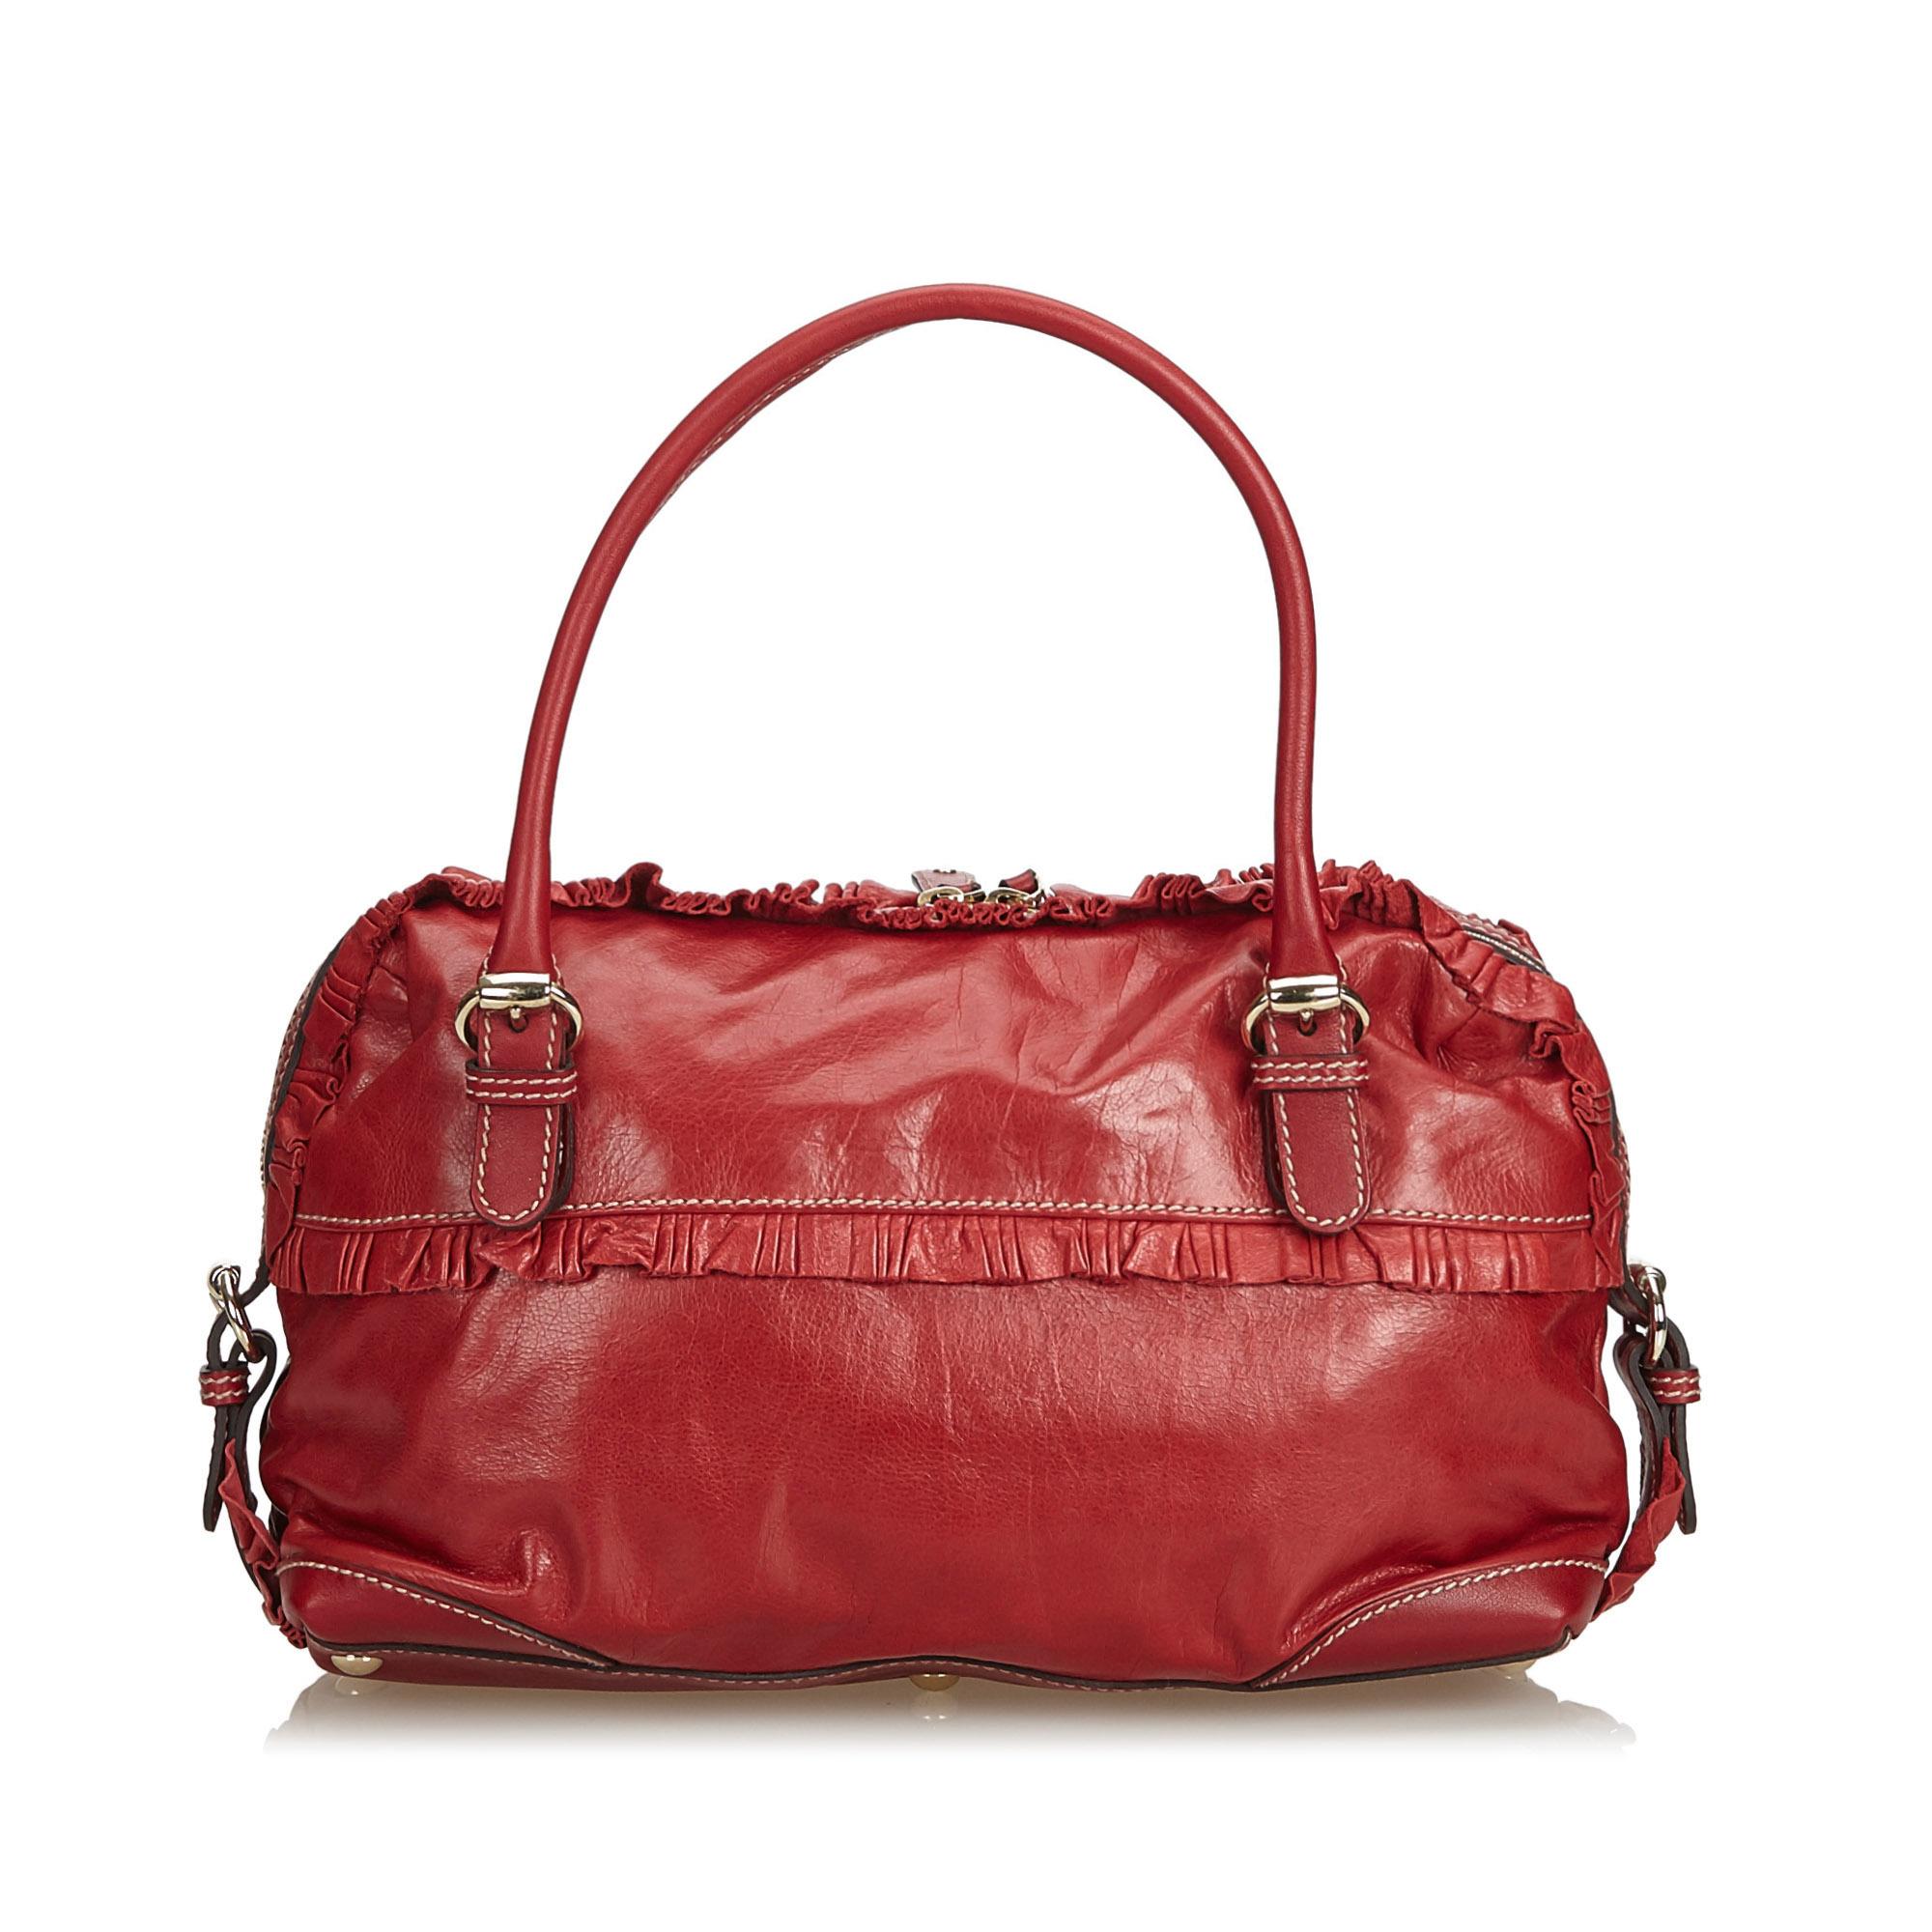 This in-vogue handbag by Gucci will make a classy addition to your outfit. Acquire a sartorial taste of fashion when you step out carrying this red handbag. Make heads turn with this limited edition leather bag.

